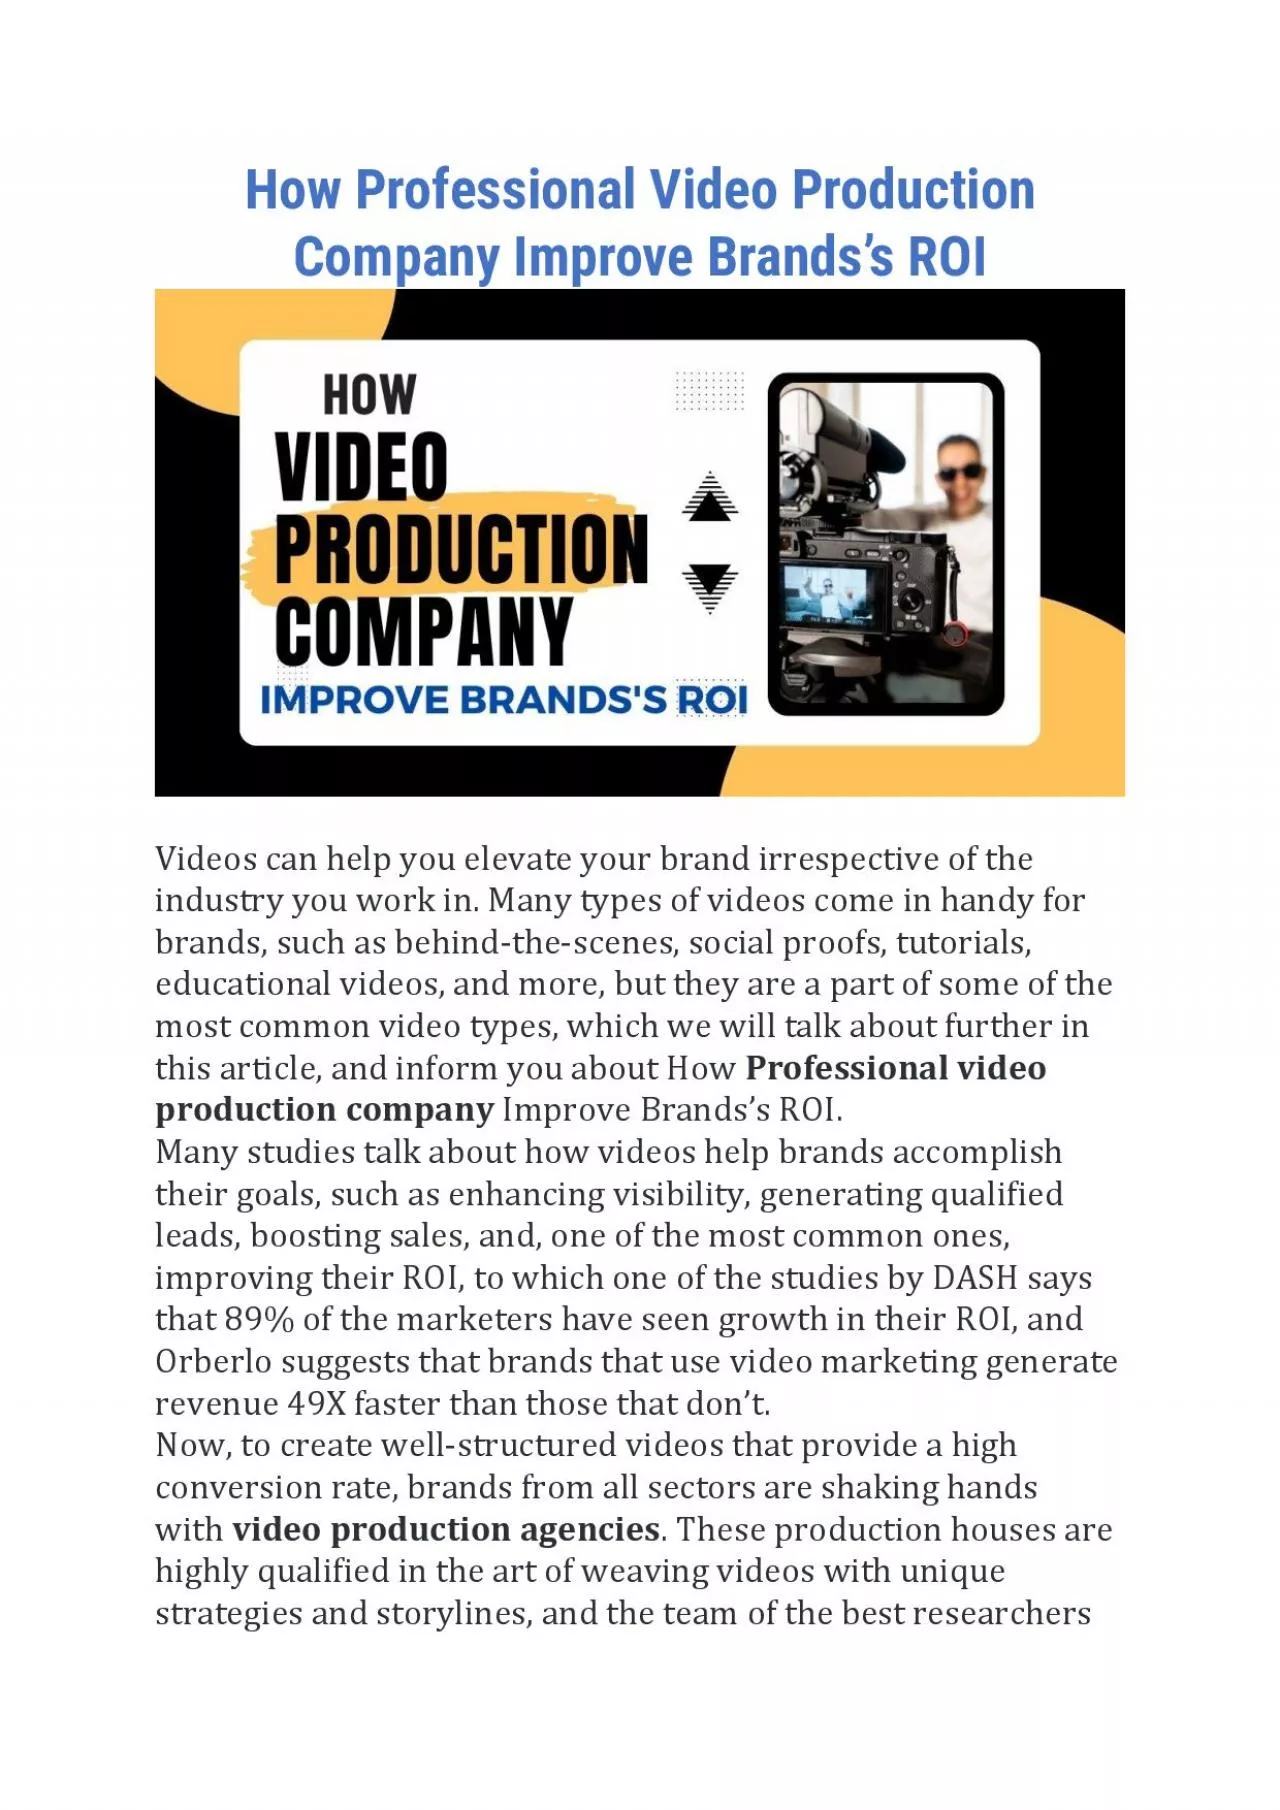 How Professional Video Production Company Improve Brands’s ROI